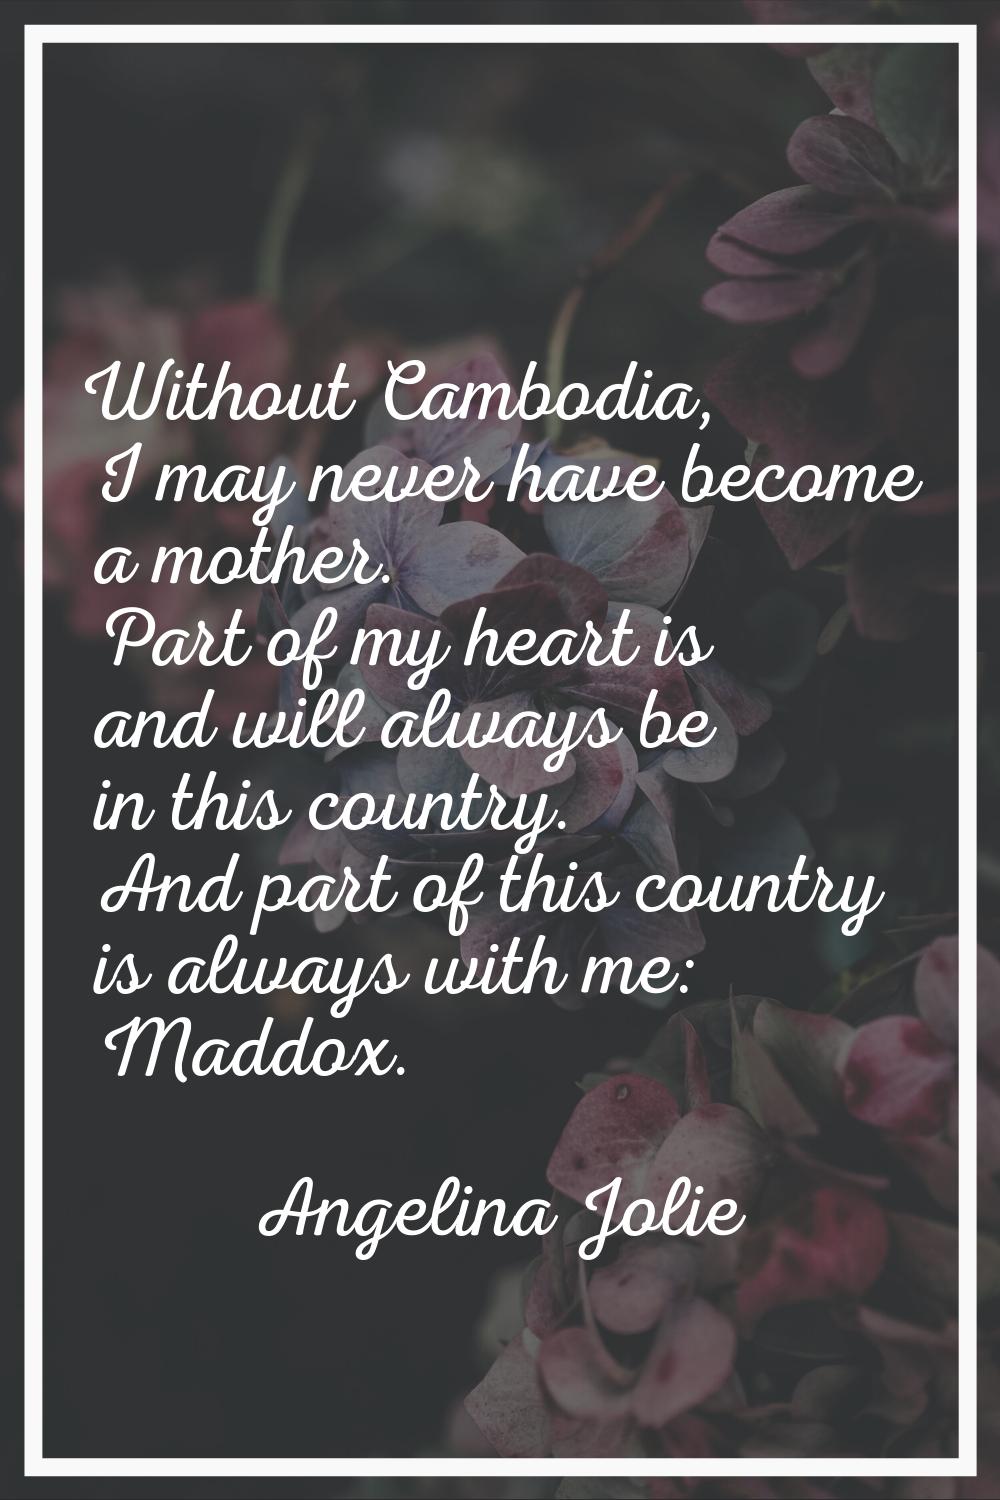 Without Cambodia, I may never have become a mother. Part of my heart is and will always be in this 